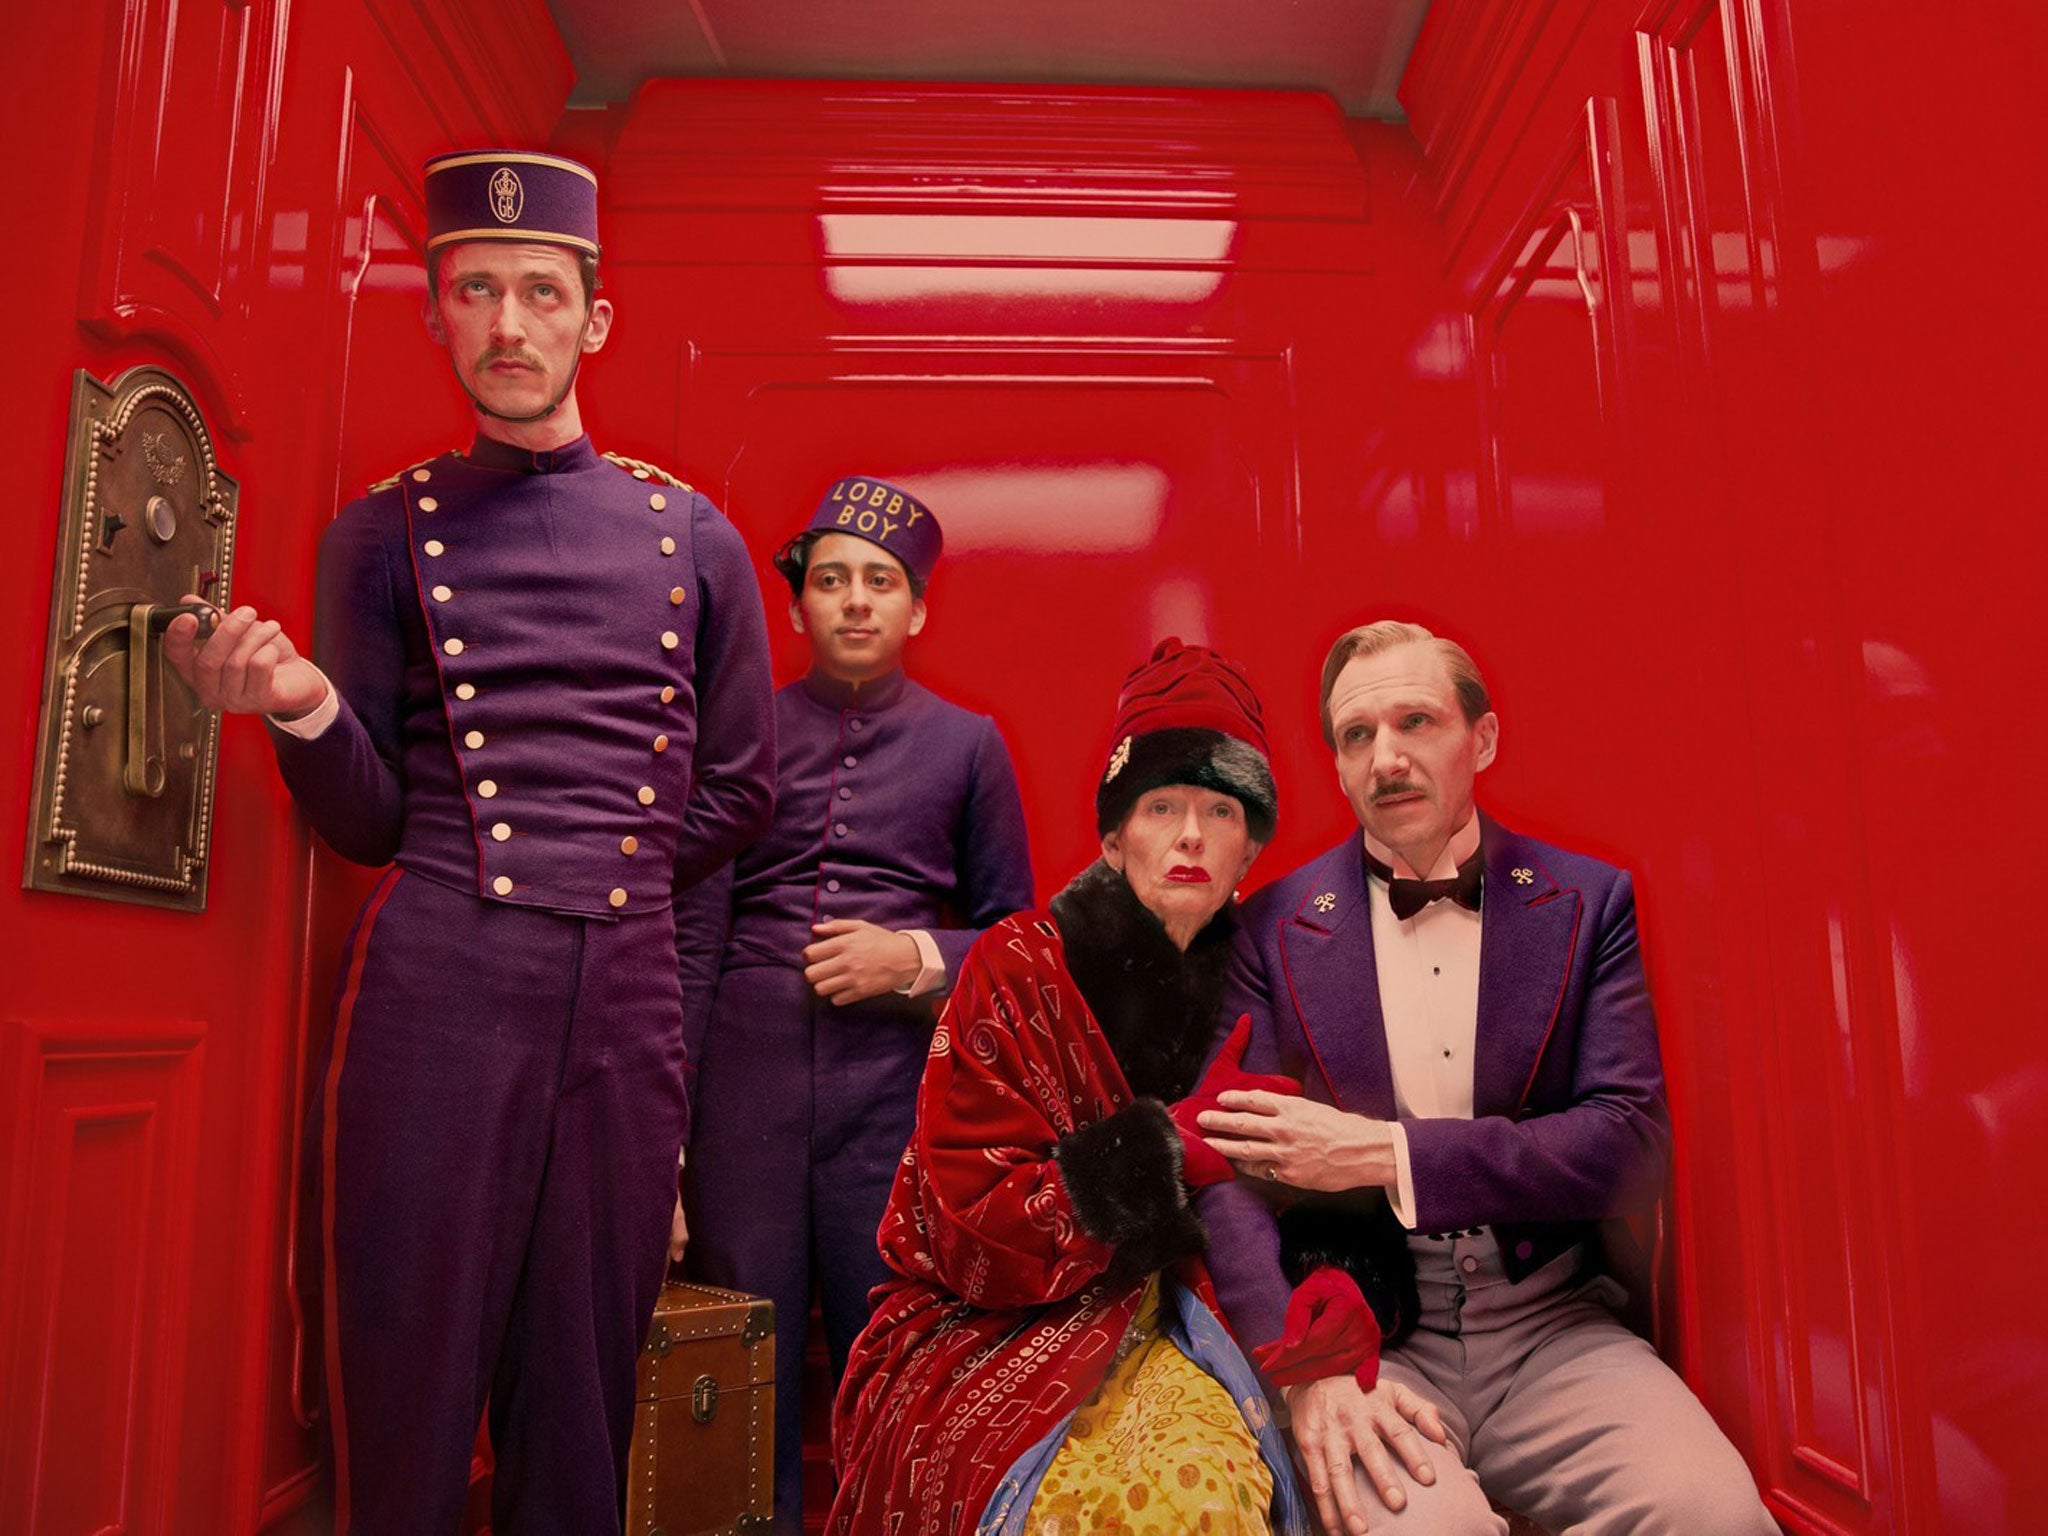 Wes Anderon's The Grand Budapest Hotel